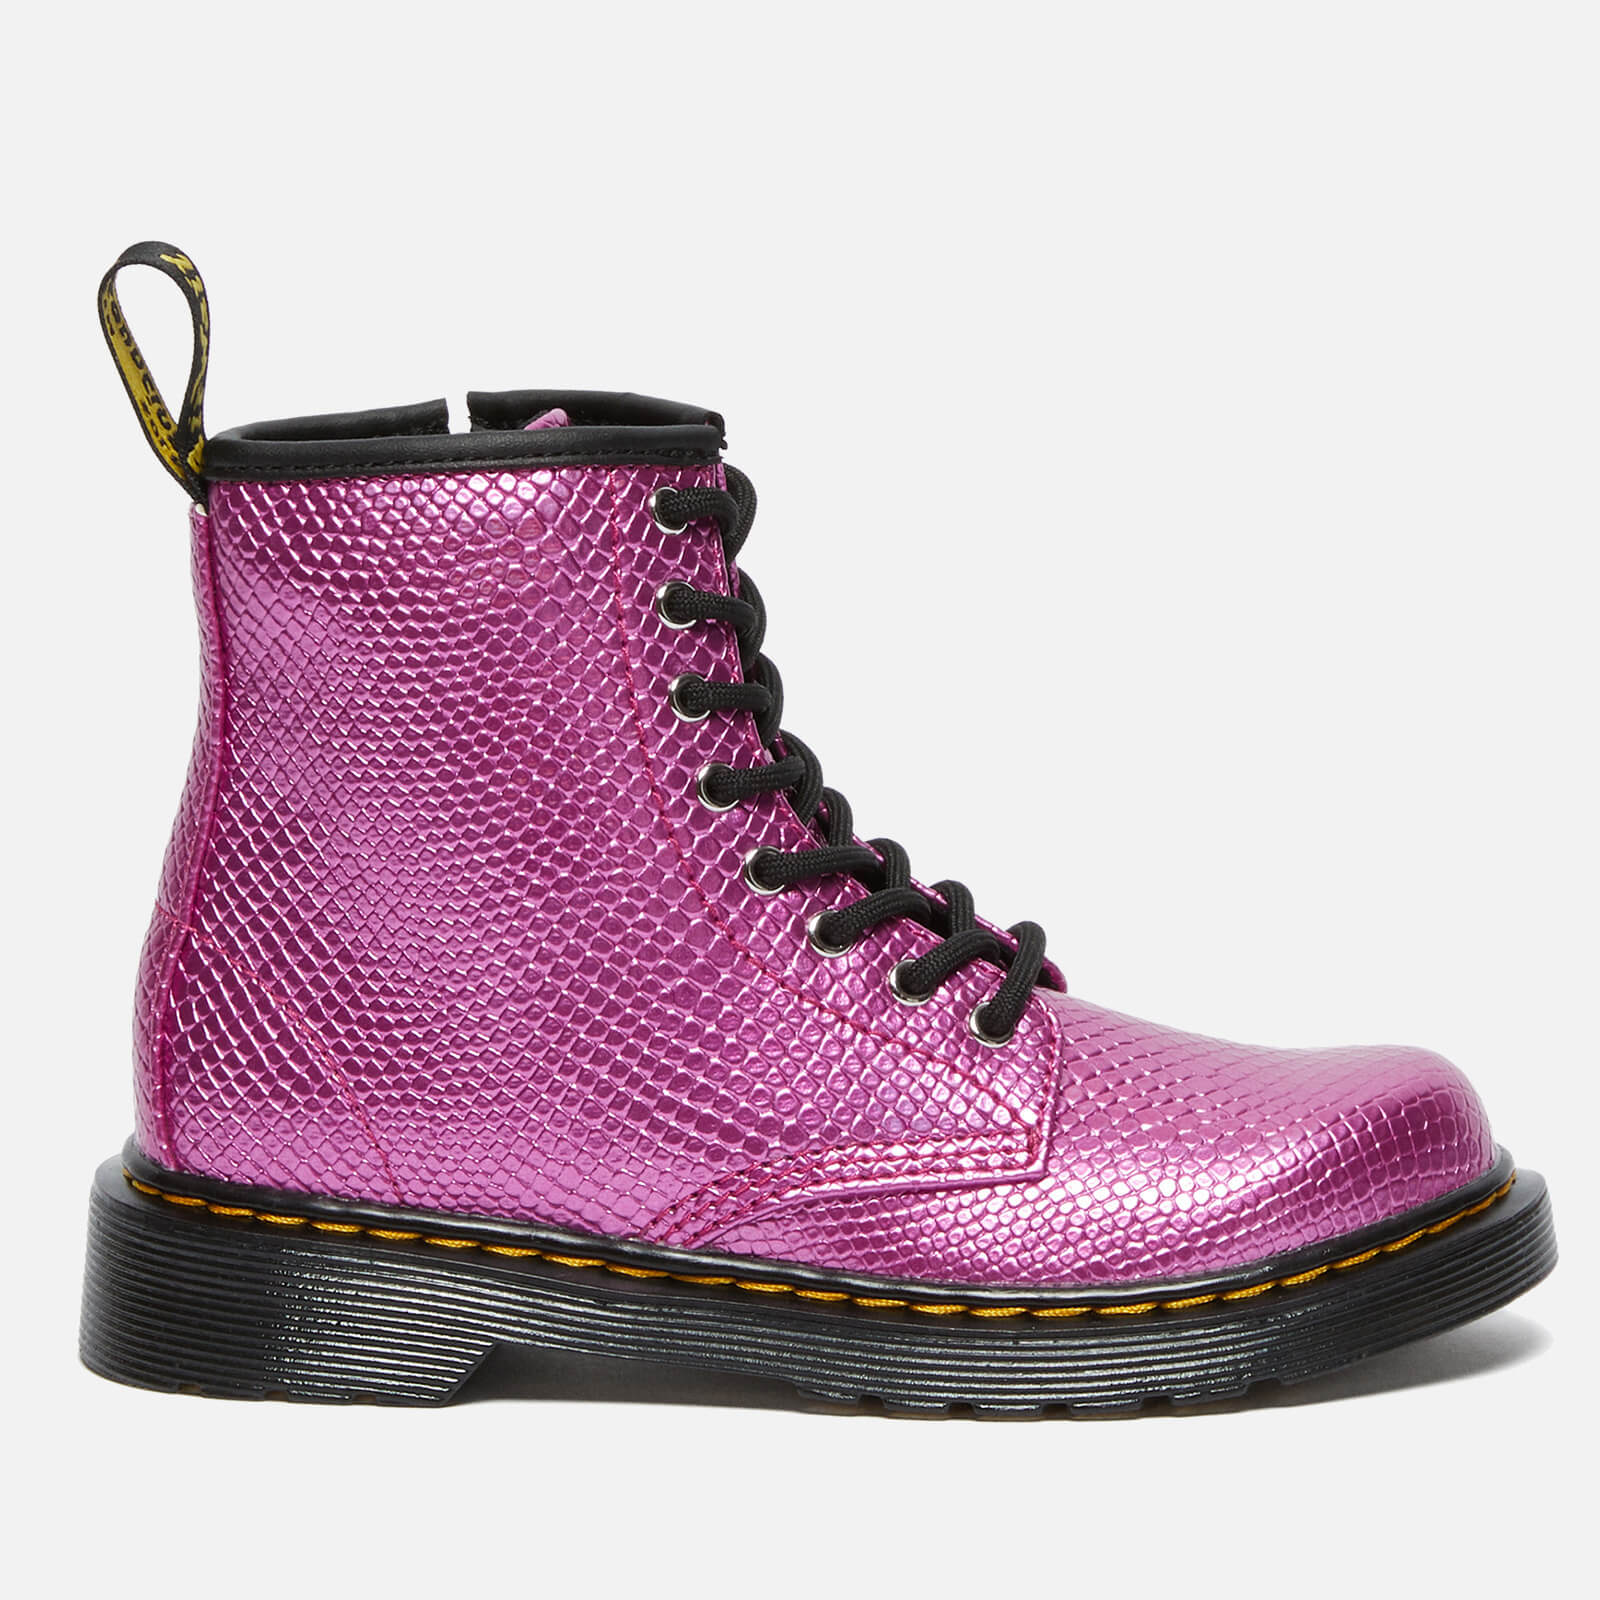 Dr. Martens Kids' 1460 Patent Lamper Lace Up Boots - Pink Reptile Emboss - UK 11 Kids